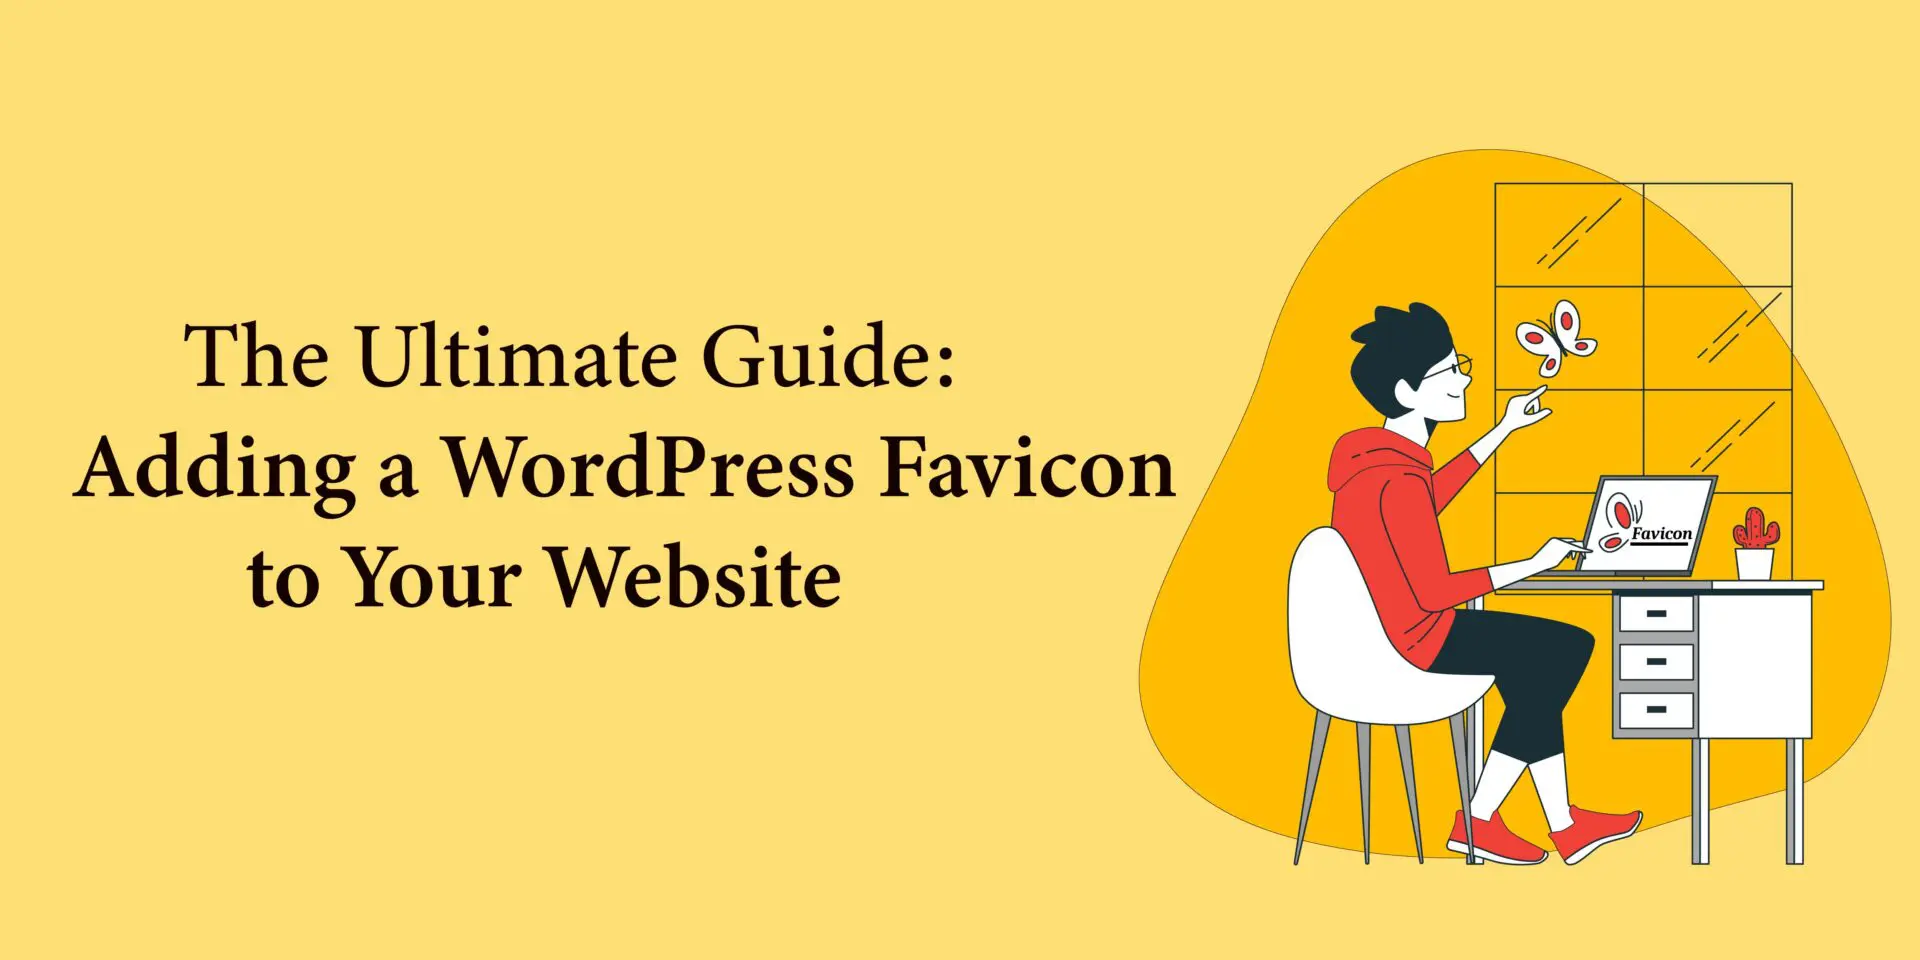 The Ultimate Guide: Adding a WordPress Favicon to Your Website